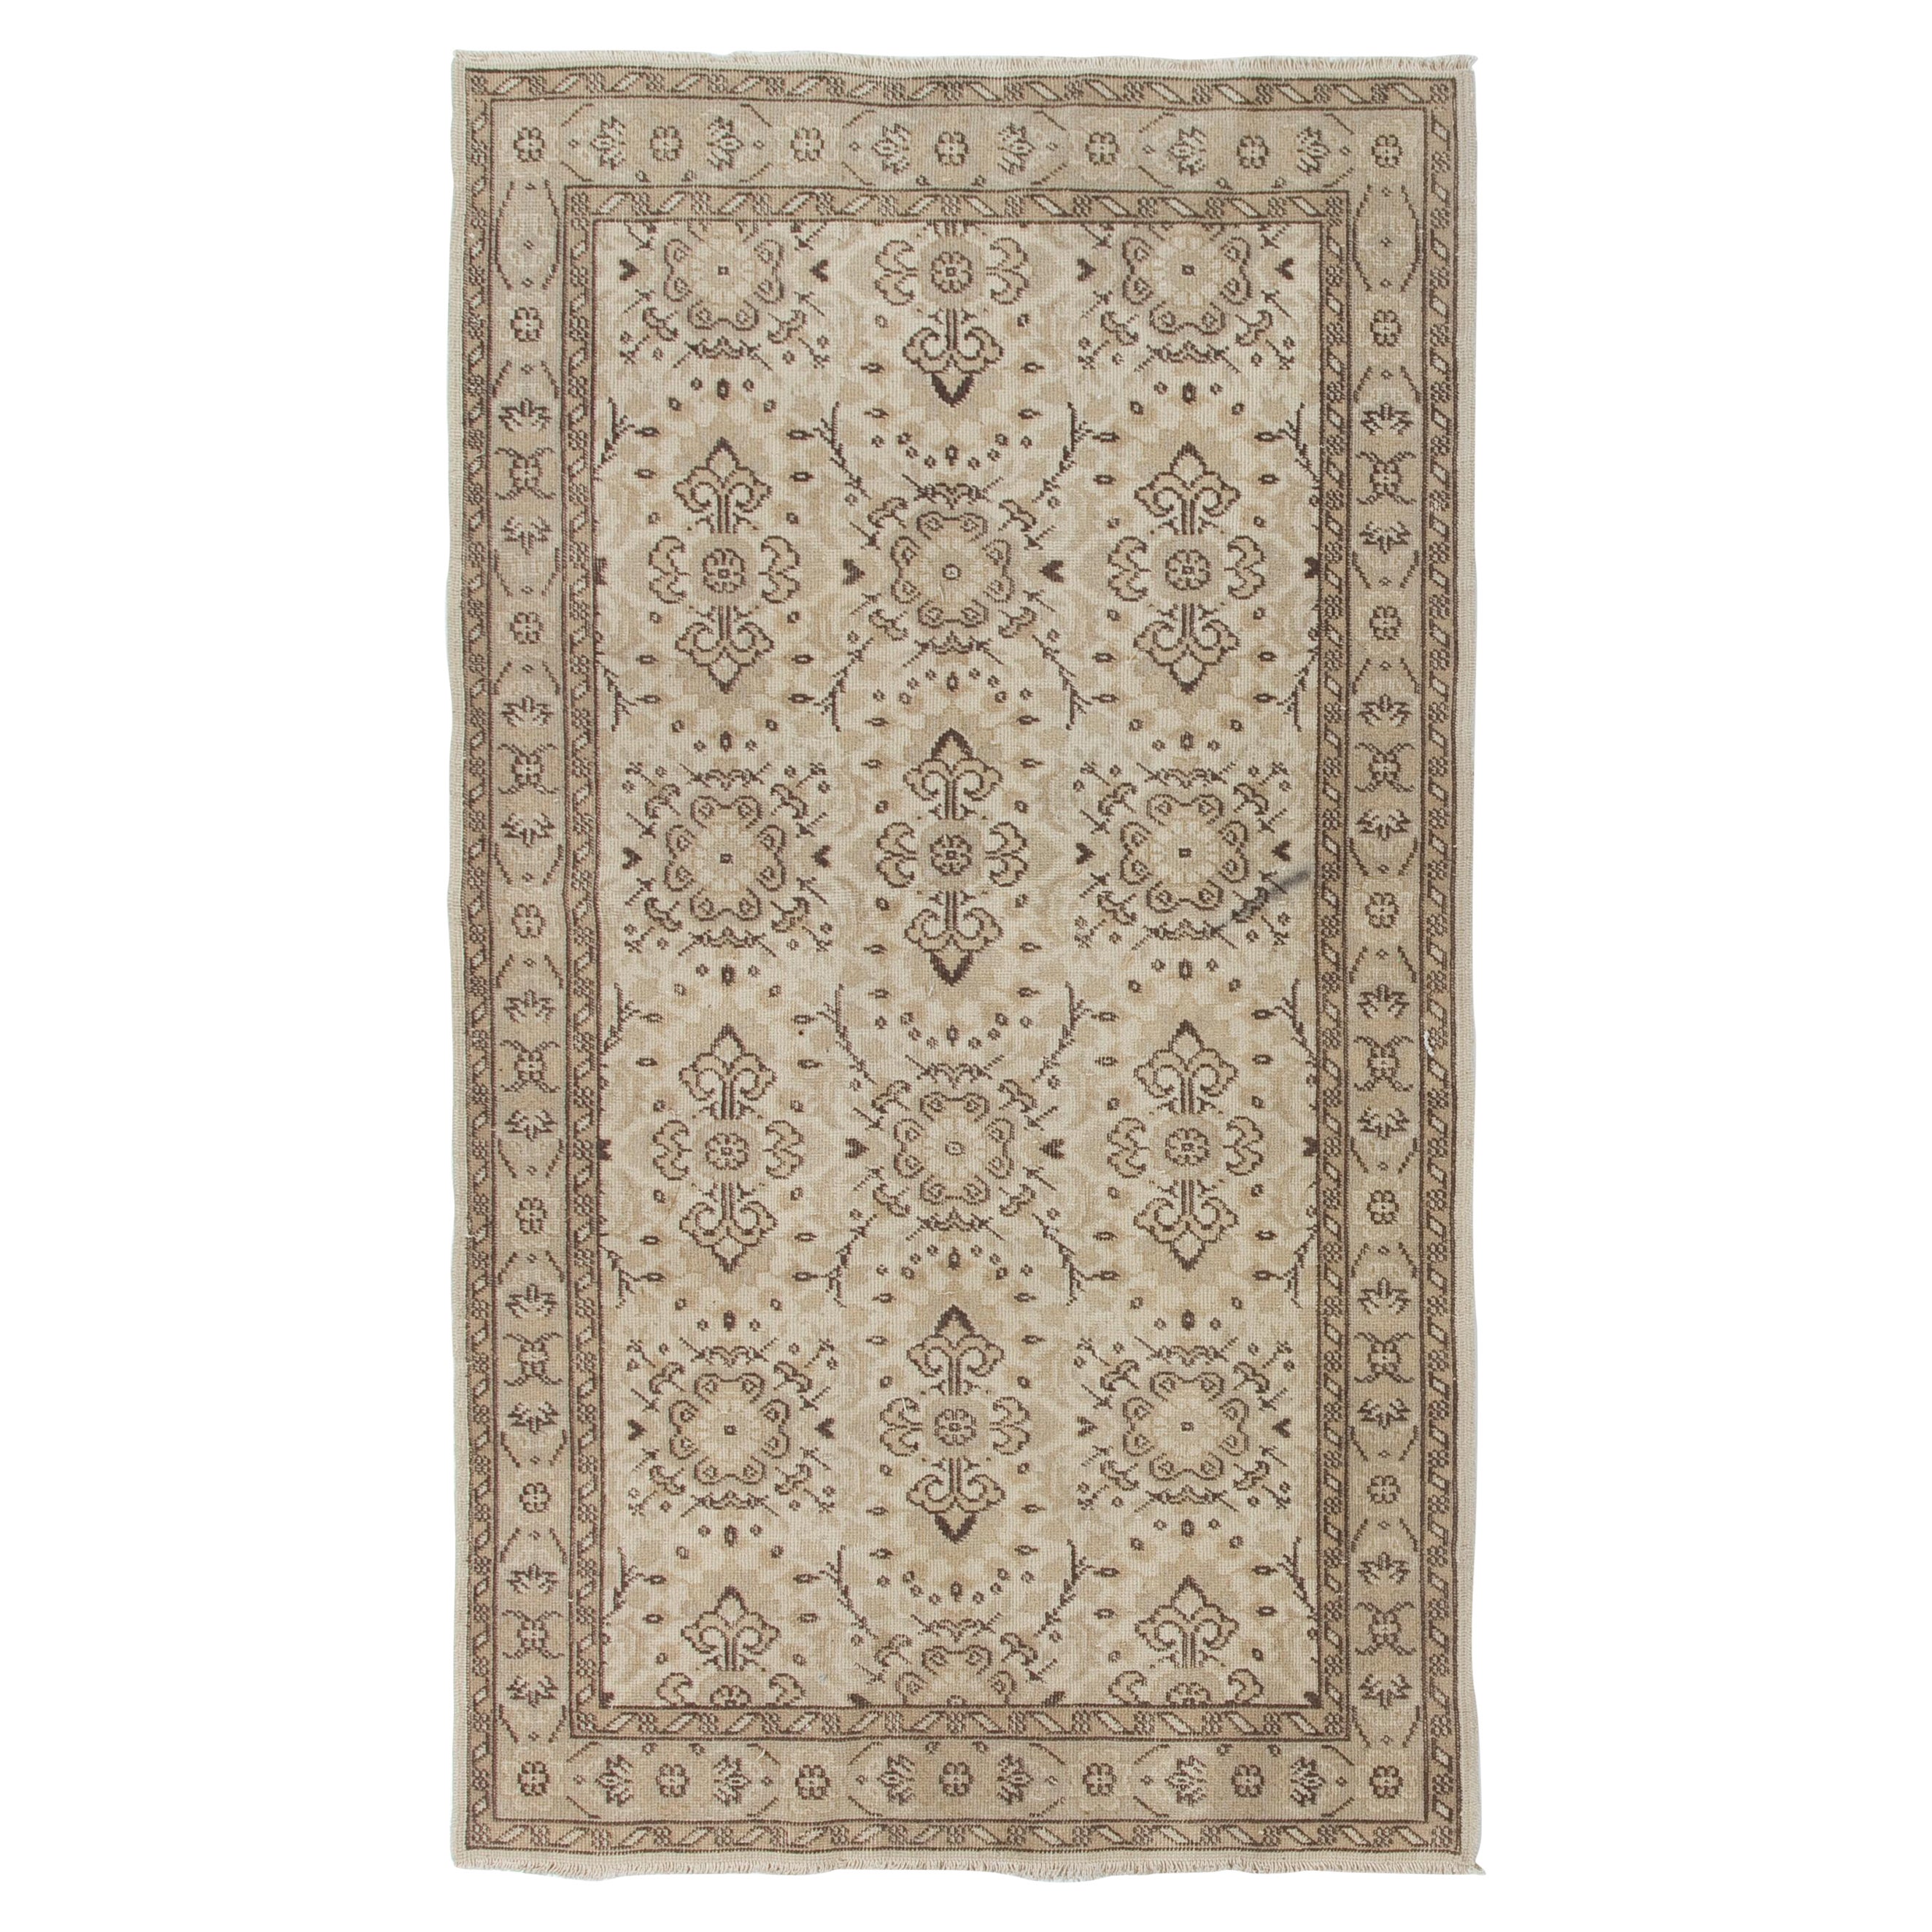 4x7 ft Vintage Floral Design Handmade Central Anatolian Rug in Neutral Colors For Sale